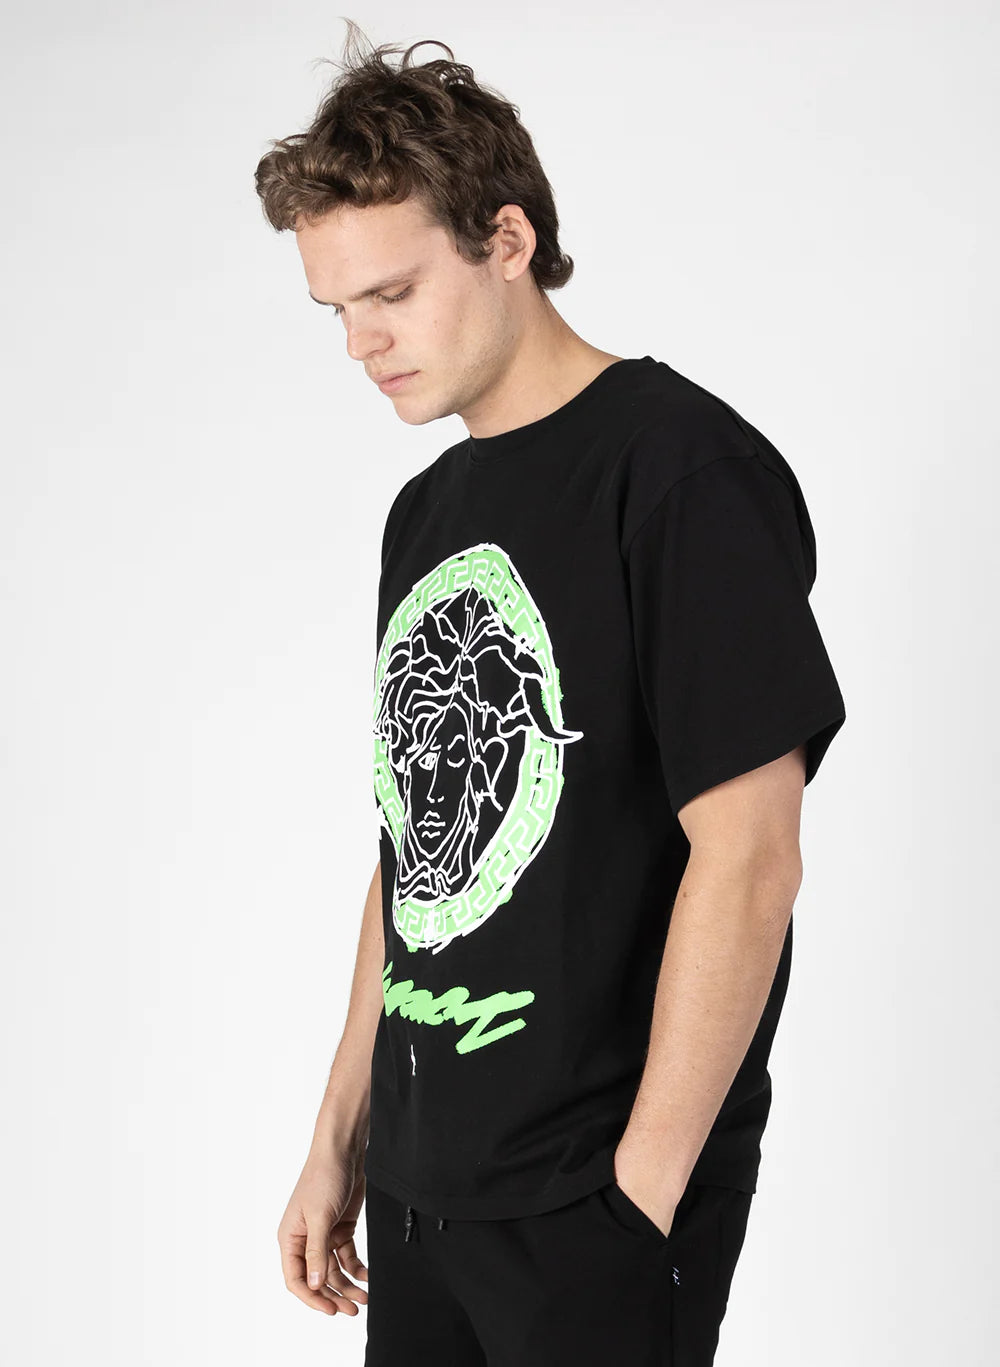 FEDERATION // Our Tee OUR MATE BLACK